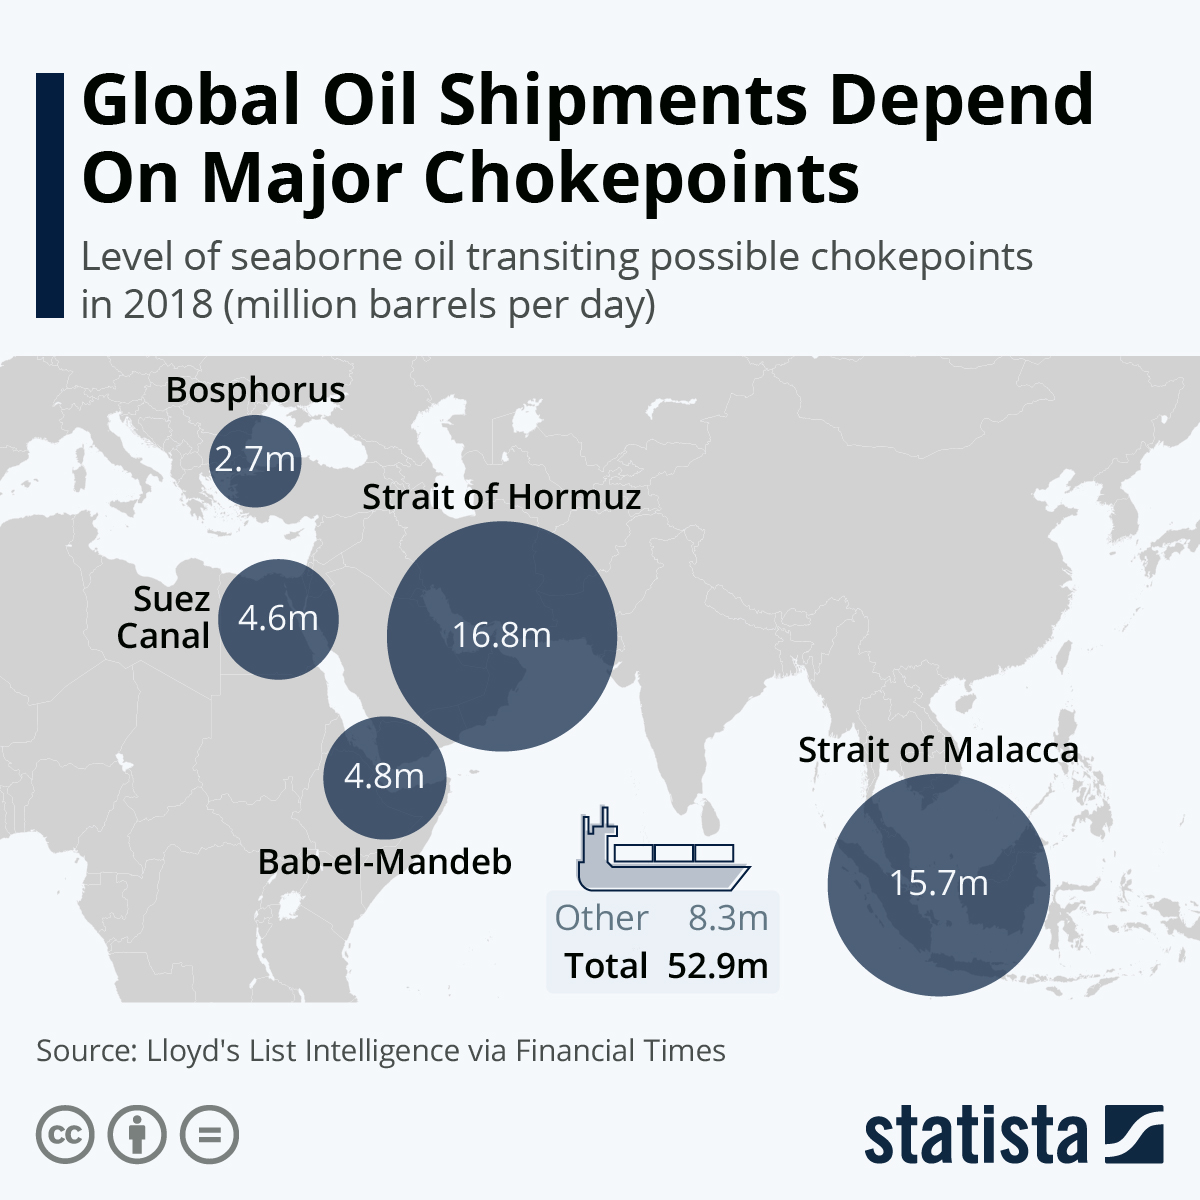 Global oil shipments depend on these major checkpoints